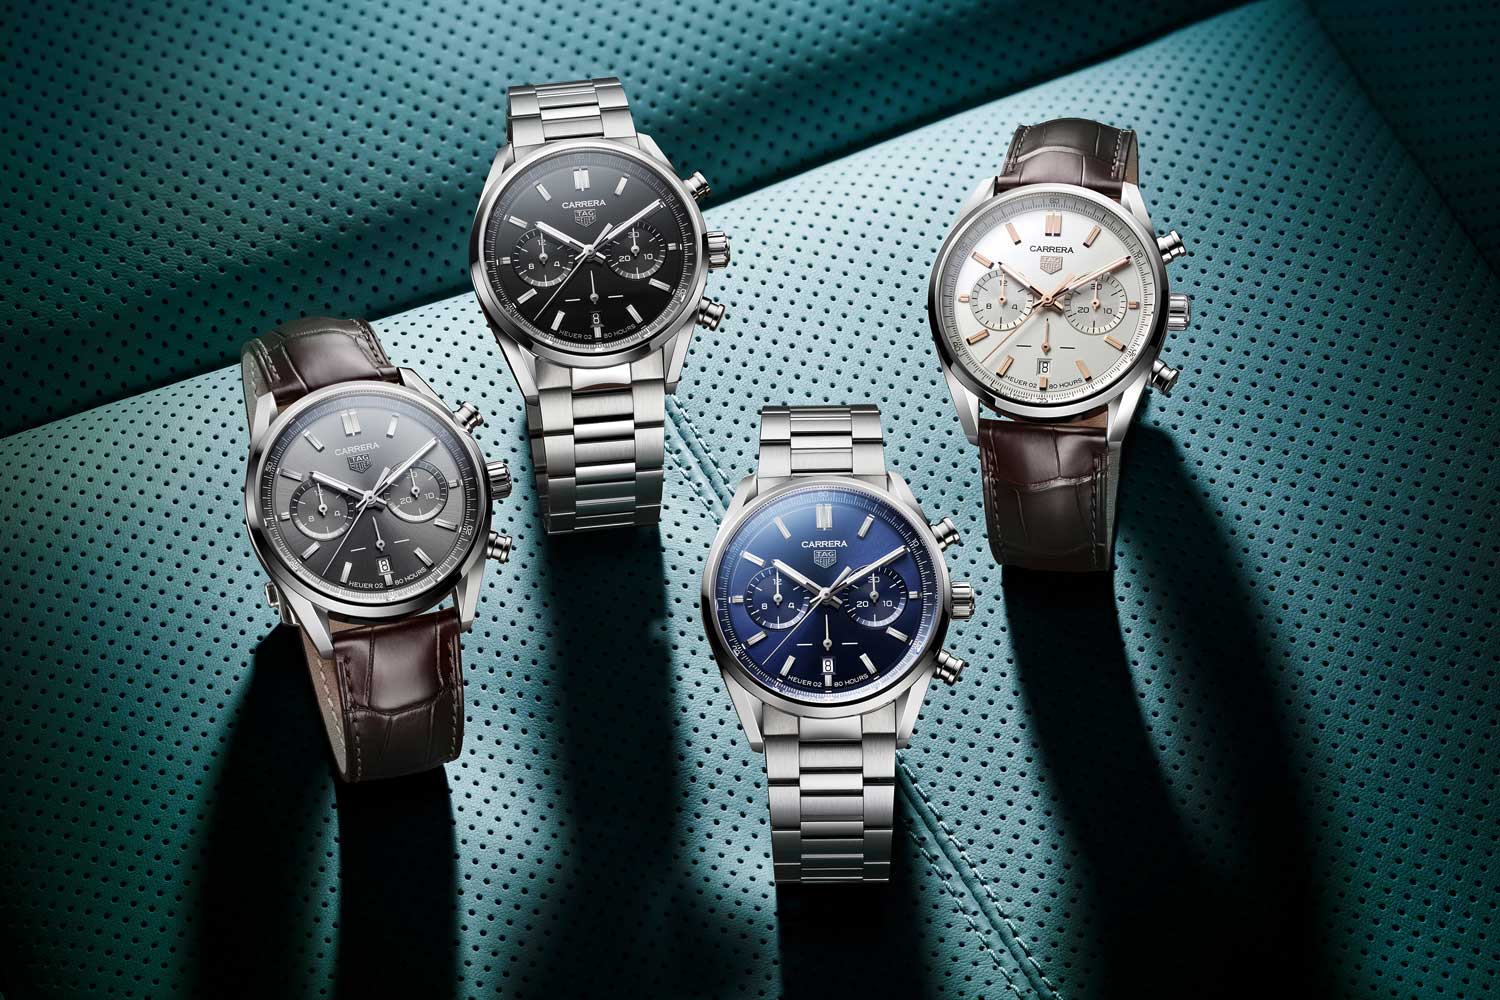 The new TAG Heuer Carrera collection